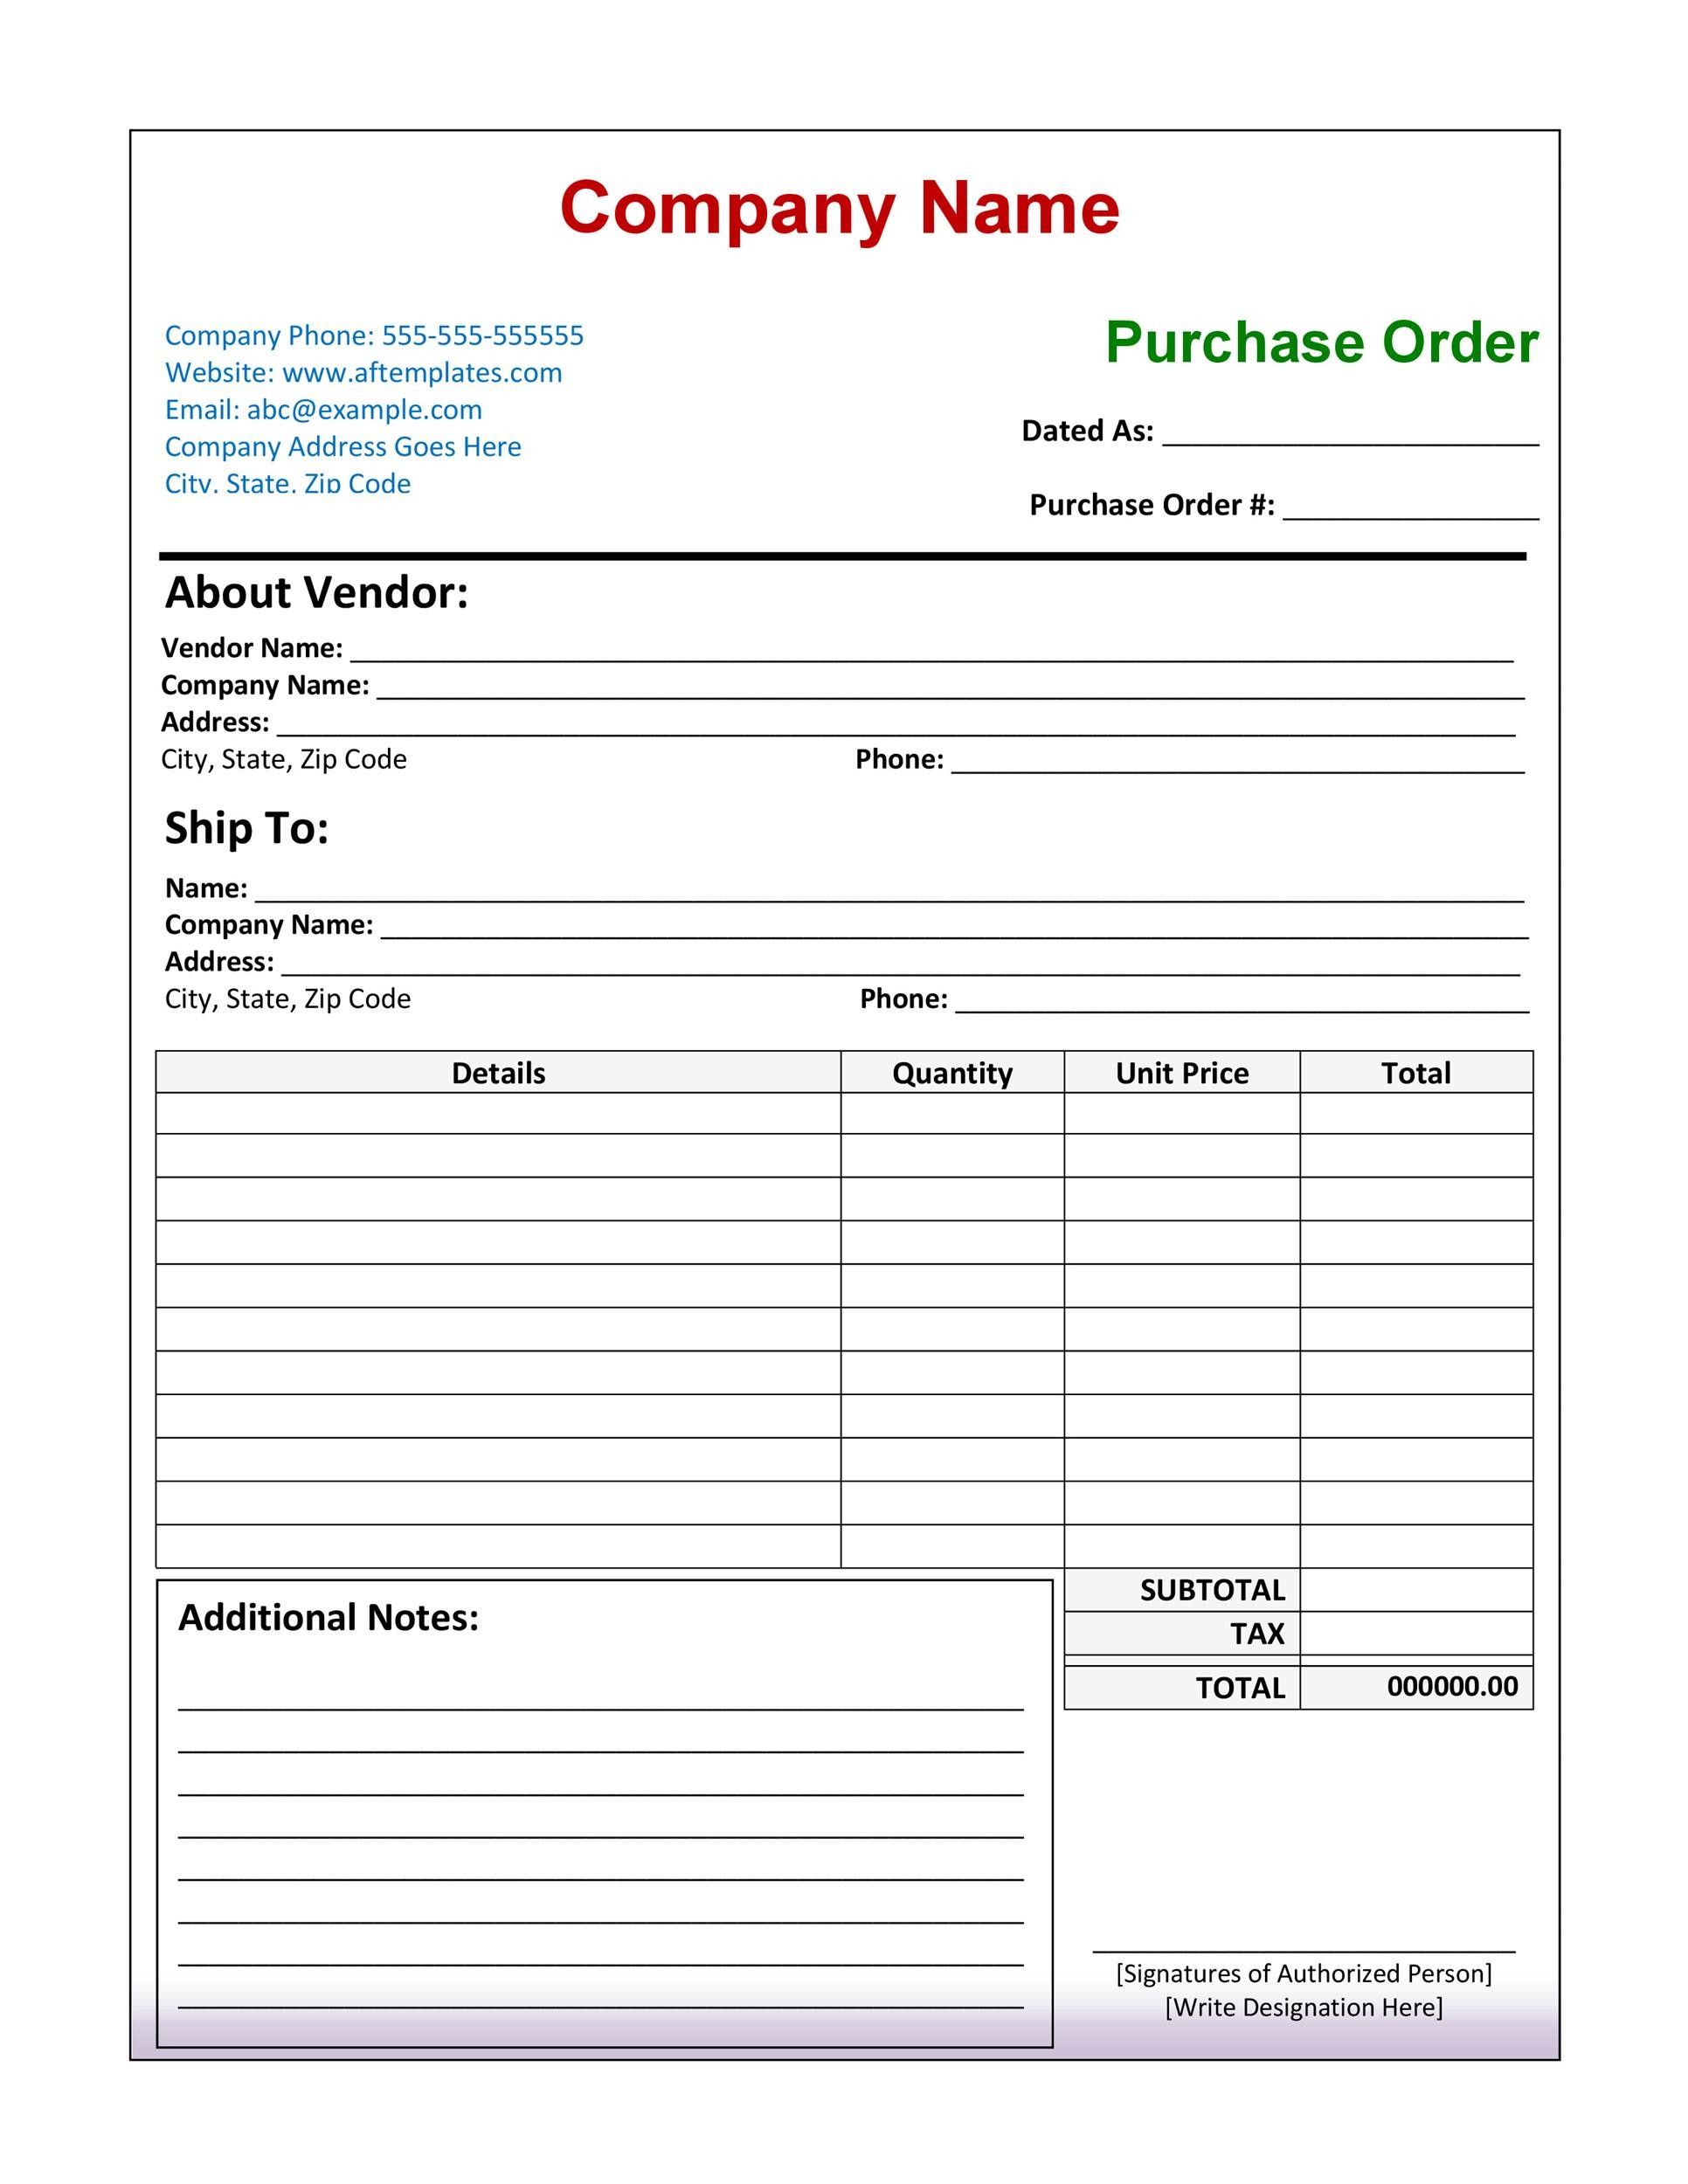 Template For A Purchase Order